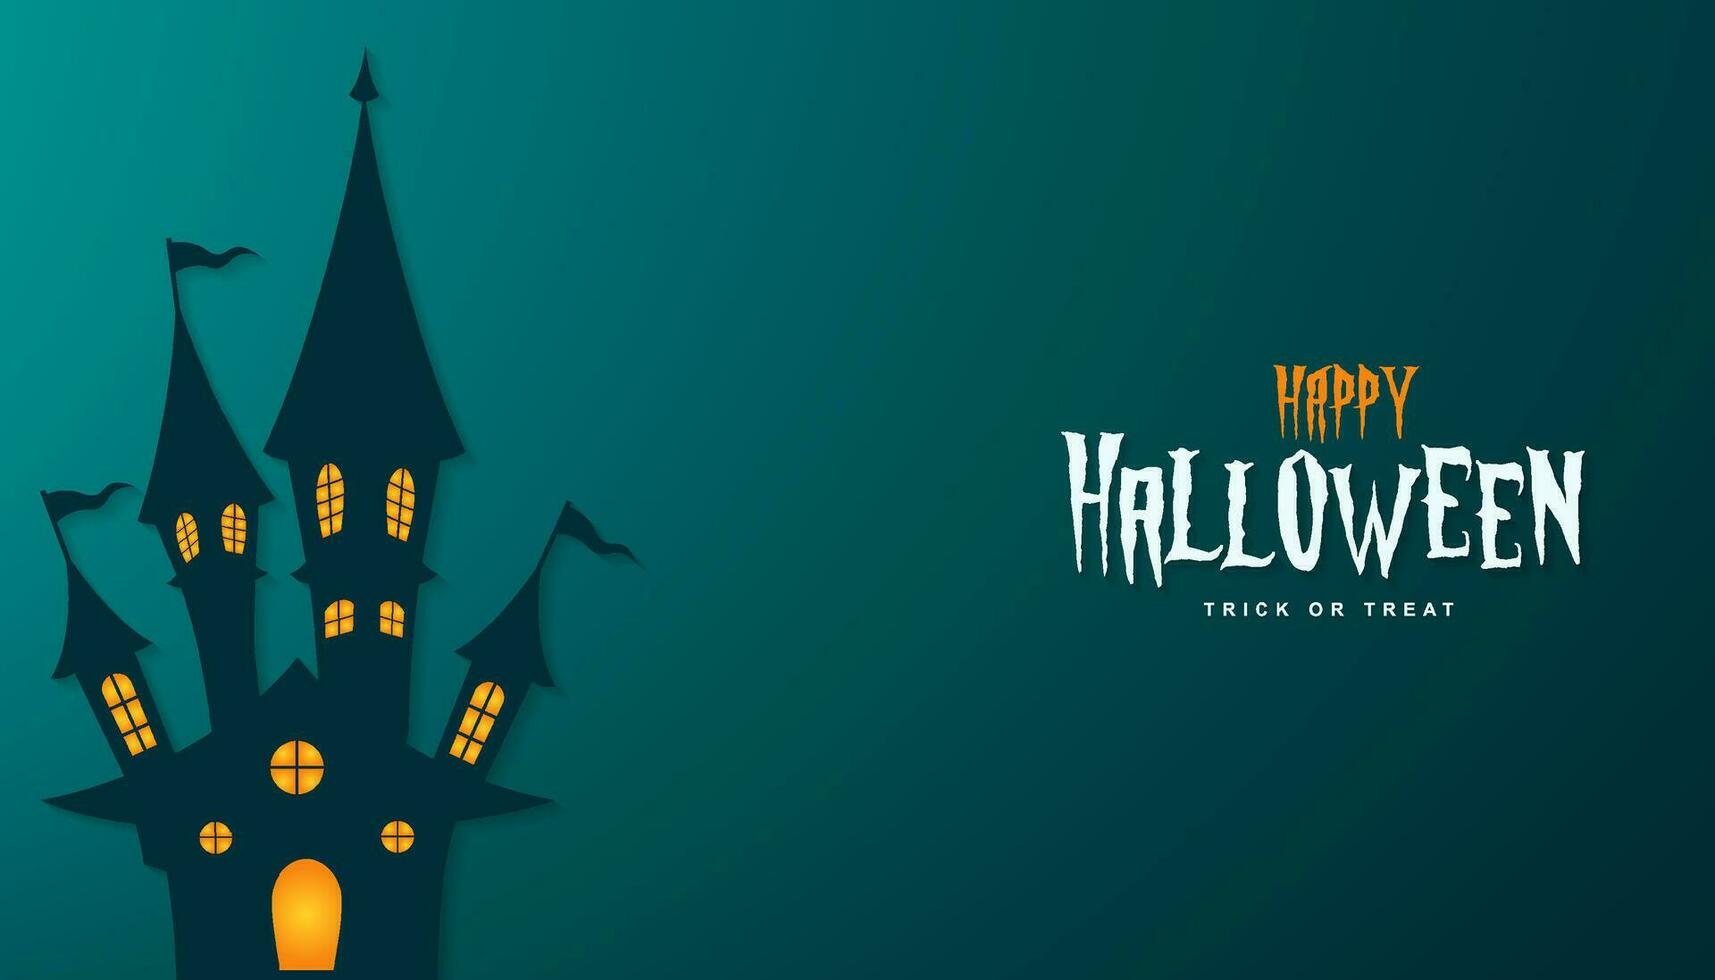 Happy halloween banner illustration with halloween haunted house and halloween text vector